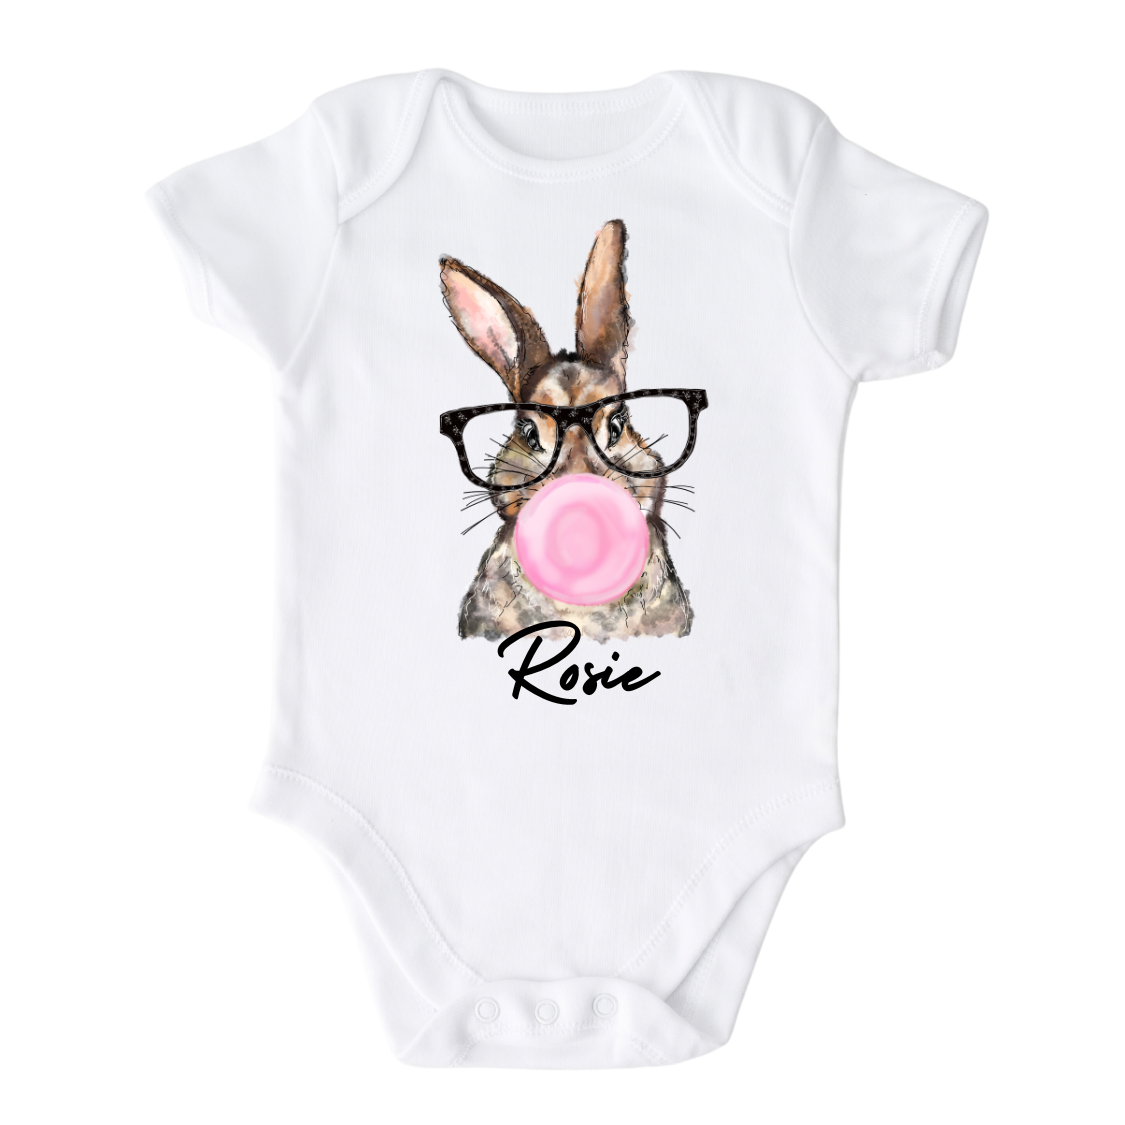 Clothing & Accessories :: Kids & Baby :: Baby Clothing :: Funny Baby  Onesie®, Narwhal Baby Clothes, Funny Baby Gifts, Cute Baby Onesie, Unisex Baby  Clothes, Baby Shower Gifts, Unique Baby Gift